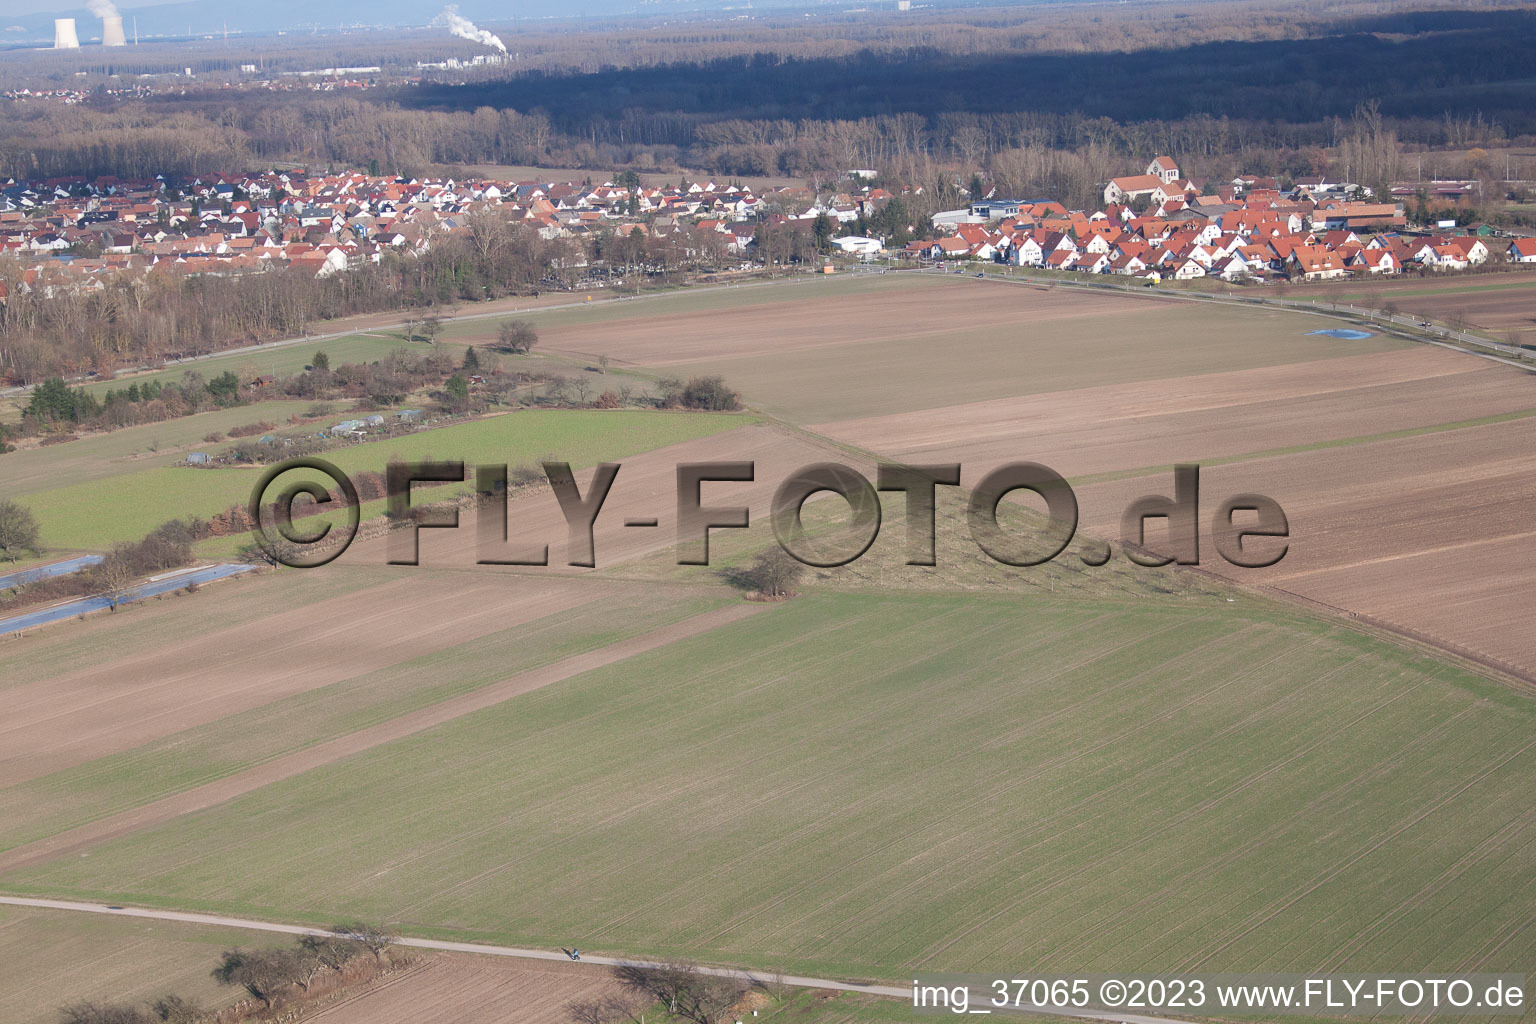 Aerial view of Hördt in the state Rhineland-Palatinate, Germany